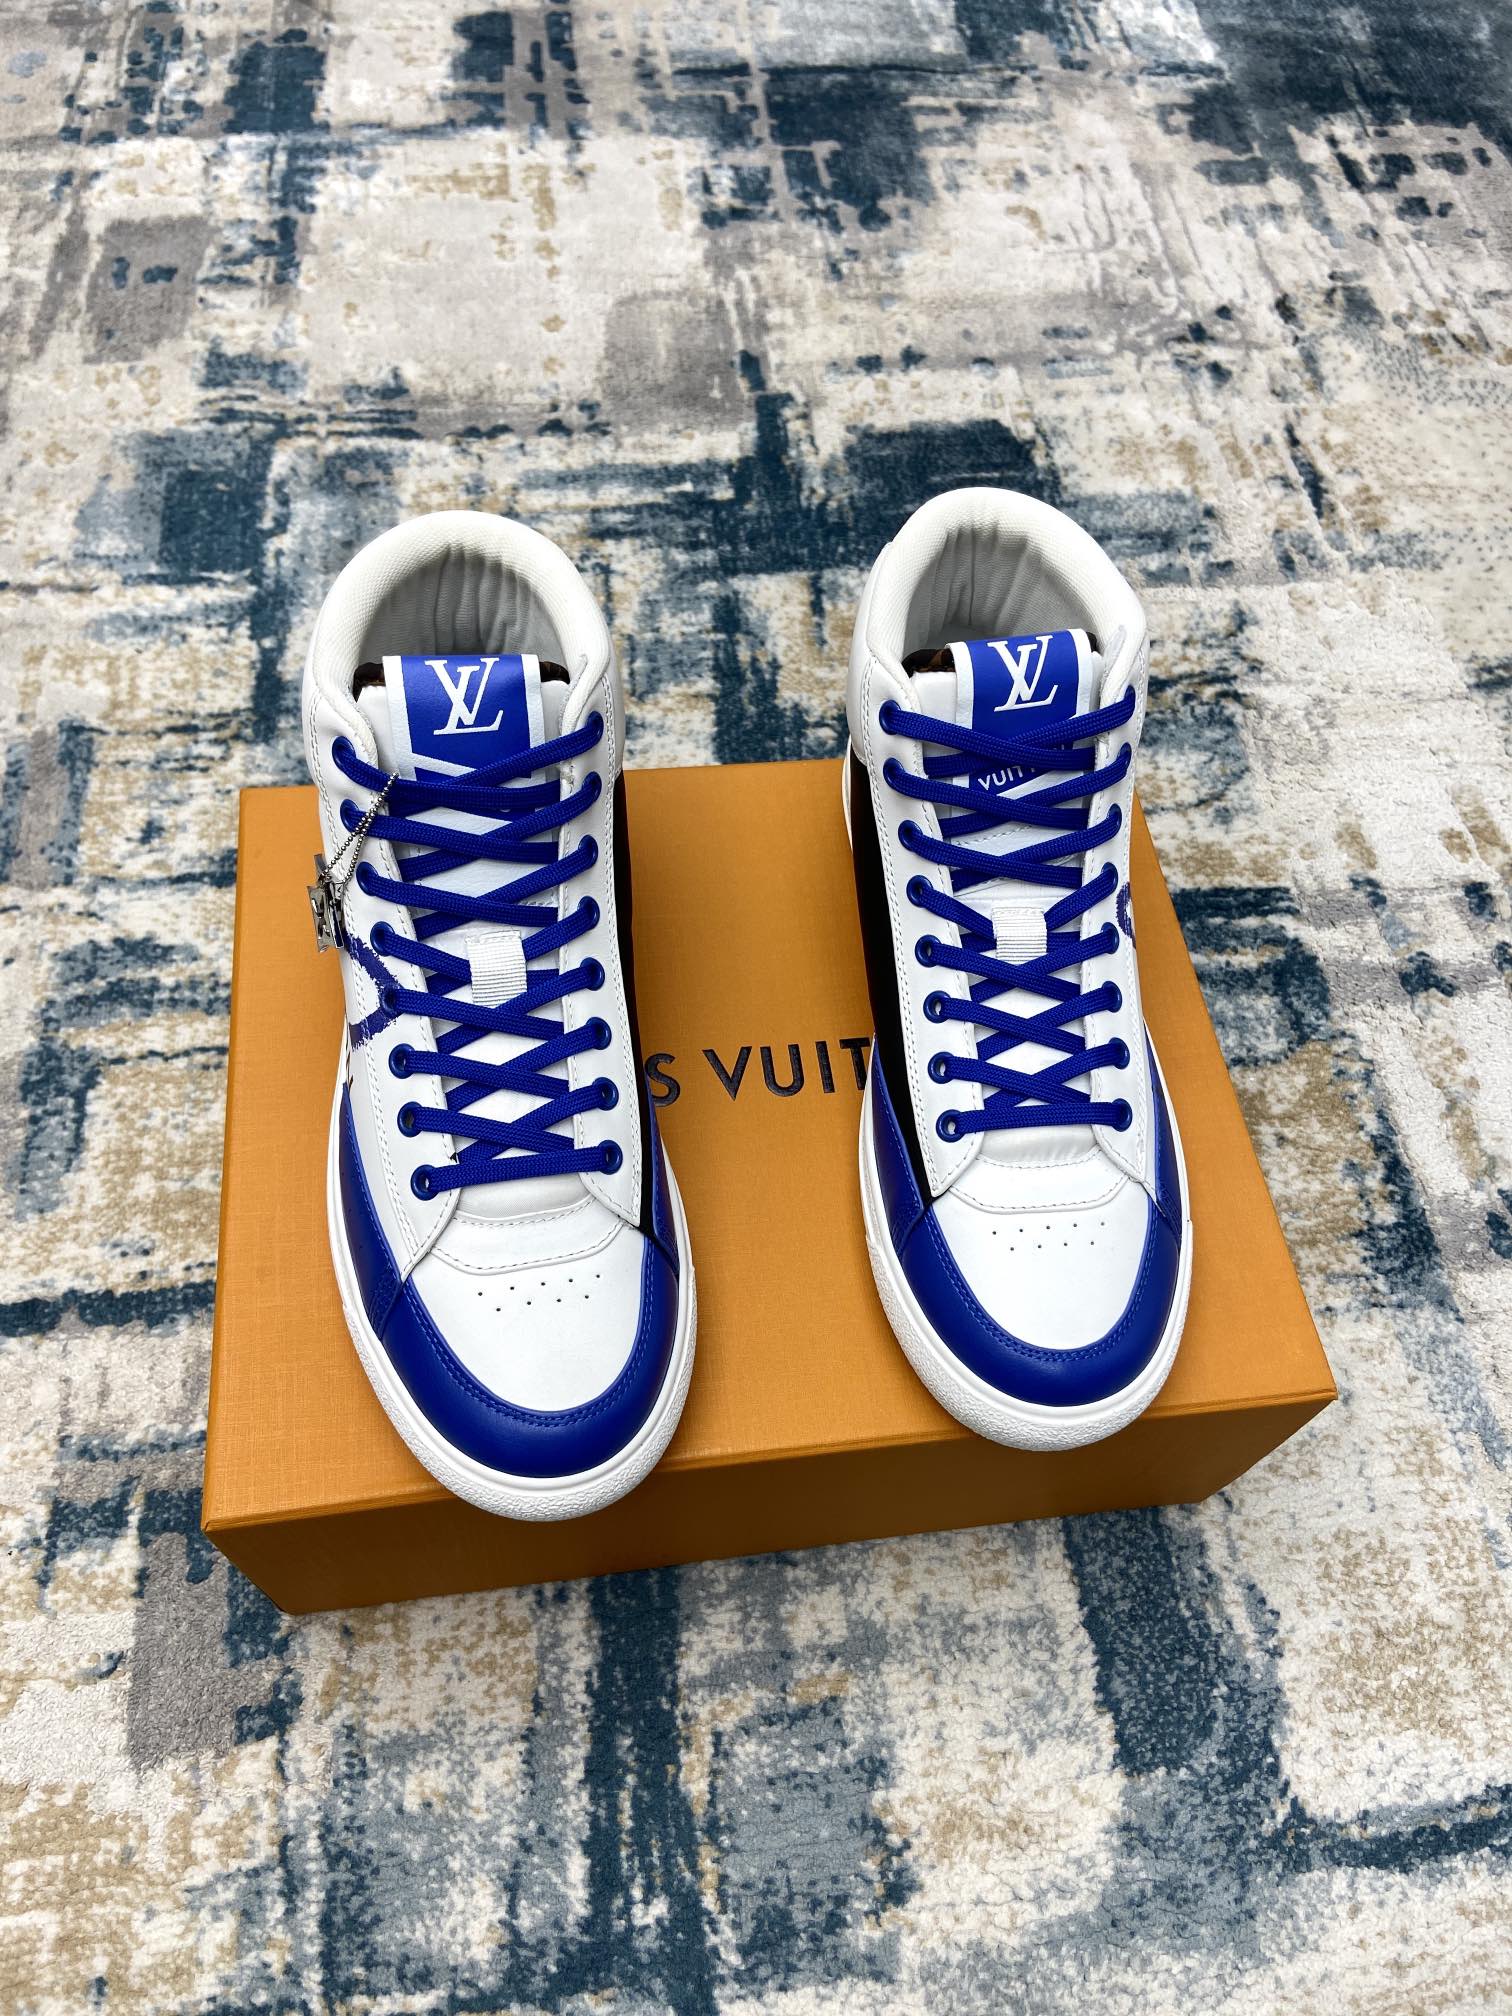 Buy First Copy Replica
 Louis Vuitton Skateboard Shoes Casual Shoes Unisex Cowhide Rubber Fashion High Tops